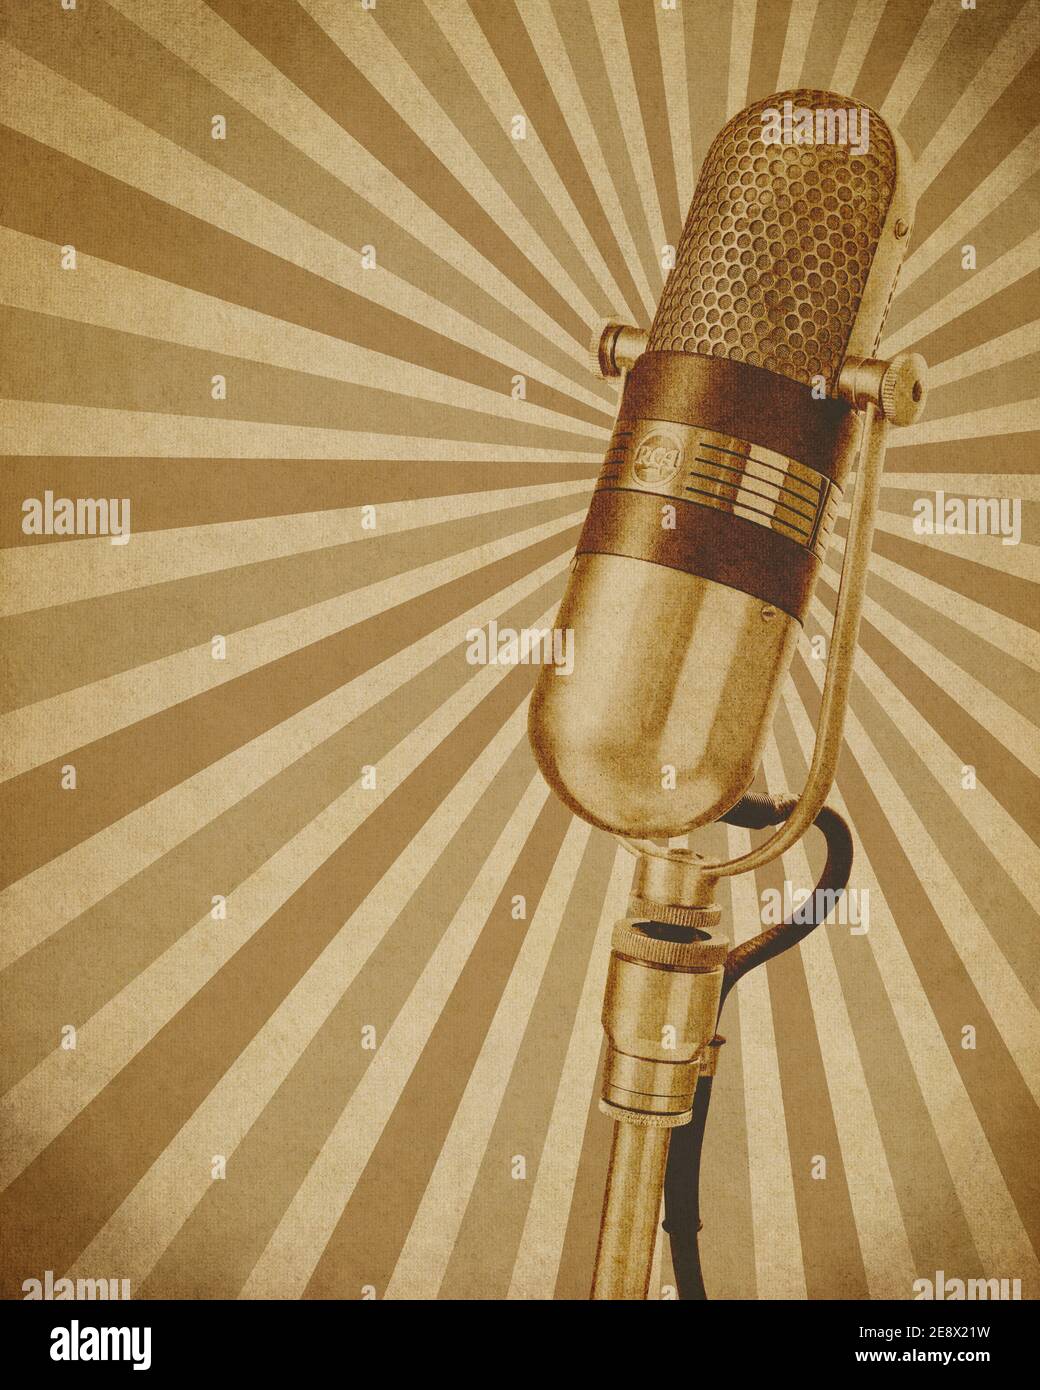 Vintage microphone poster Stock Photo